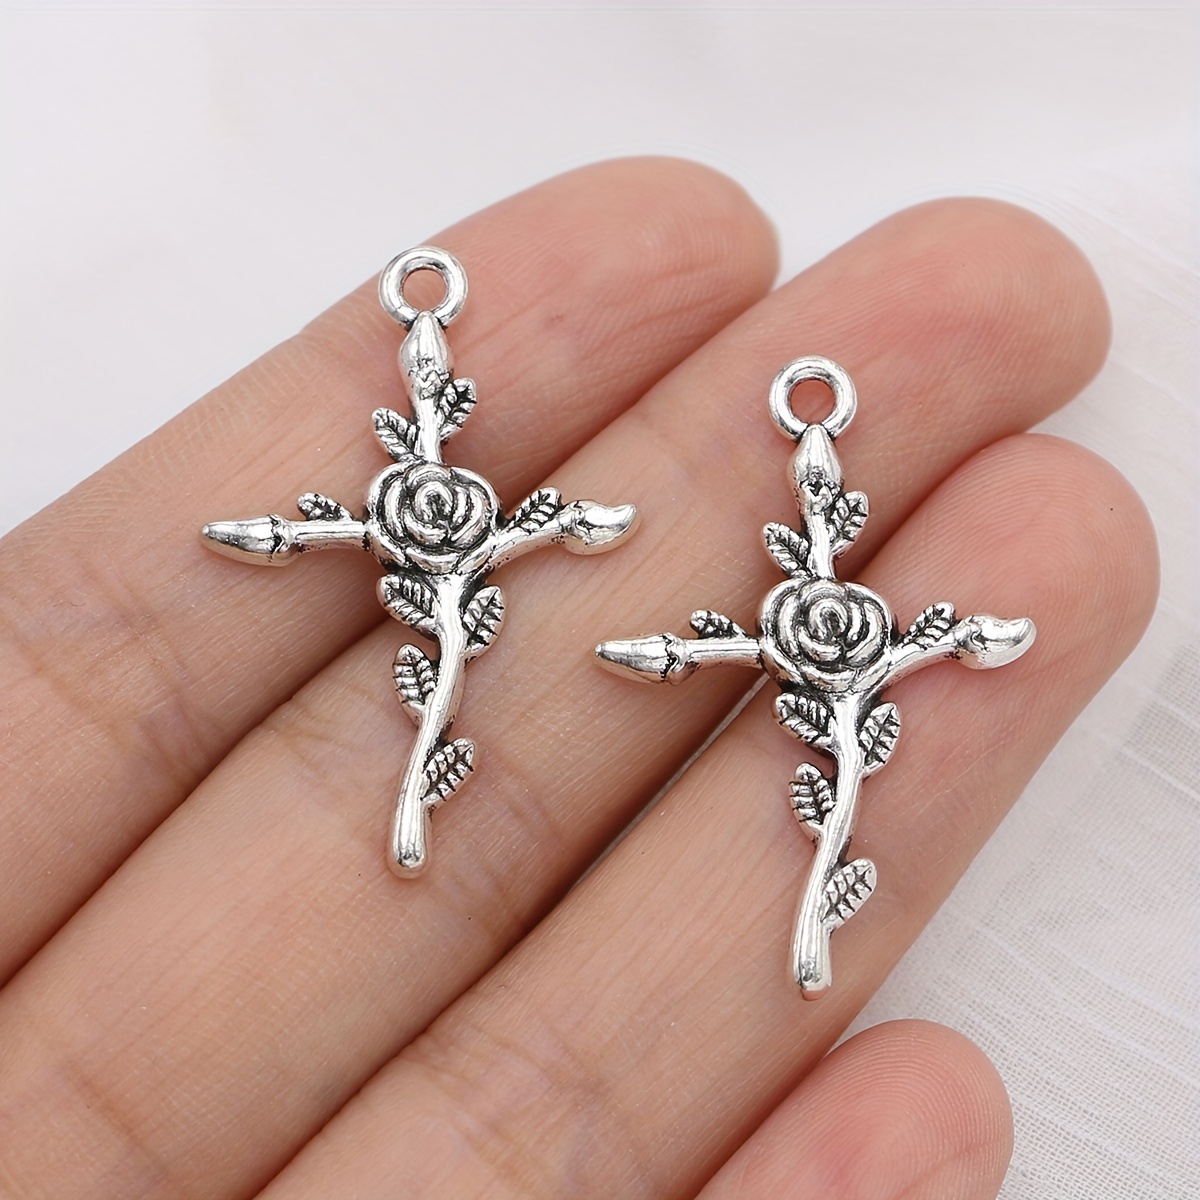 20pcs Silver Plated Hollow Out Cross Charms DIY Hollow Cross Pendants for Jewelry Making Handmade Necklace Earrings Accessories Small Business